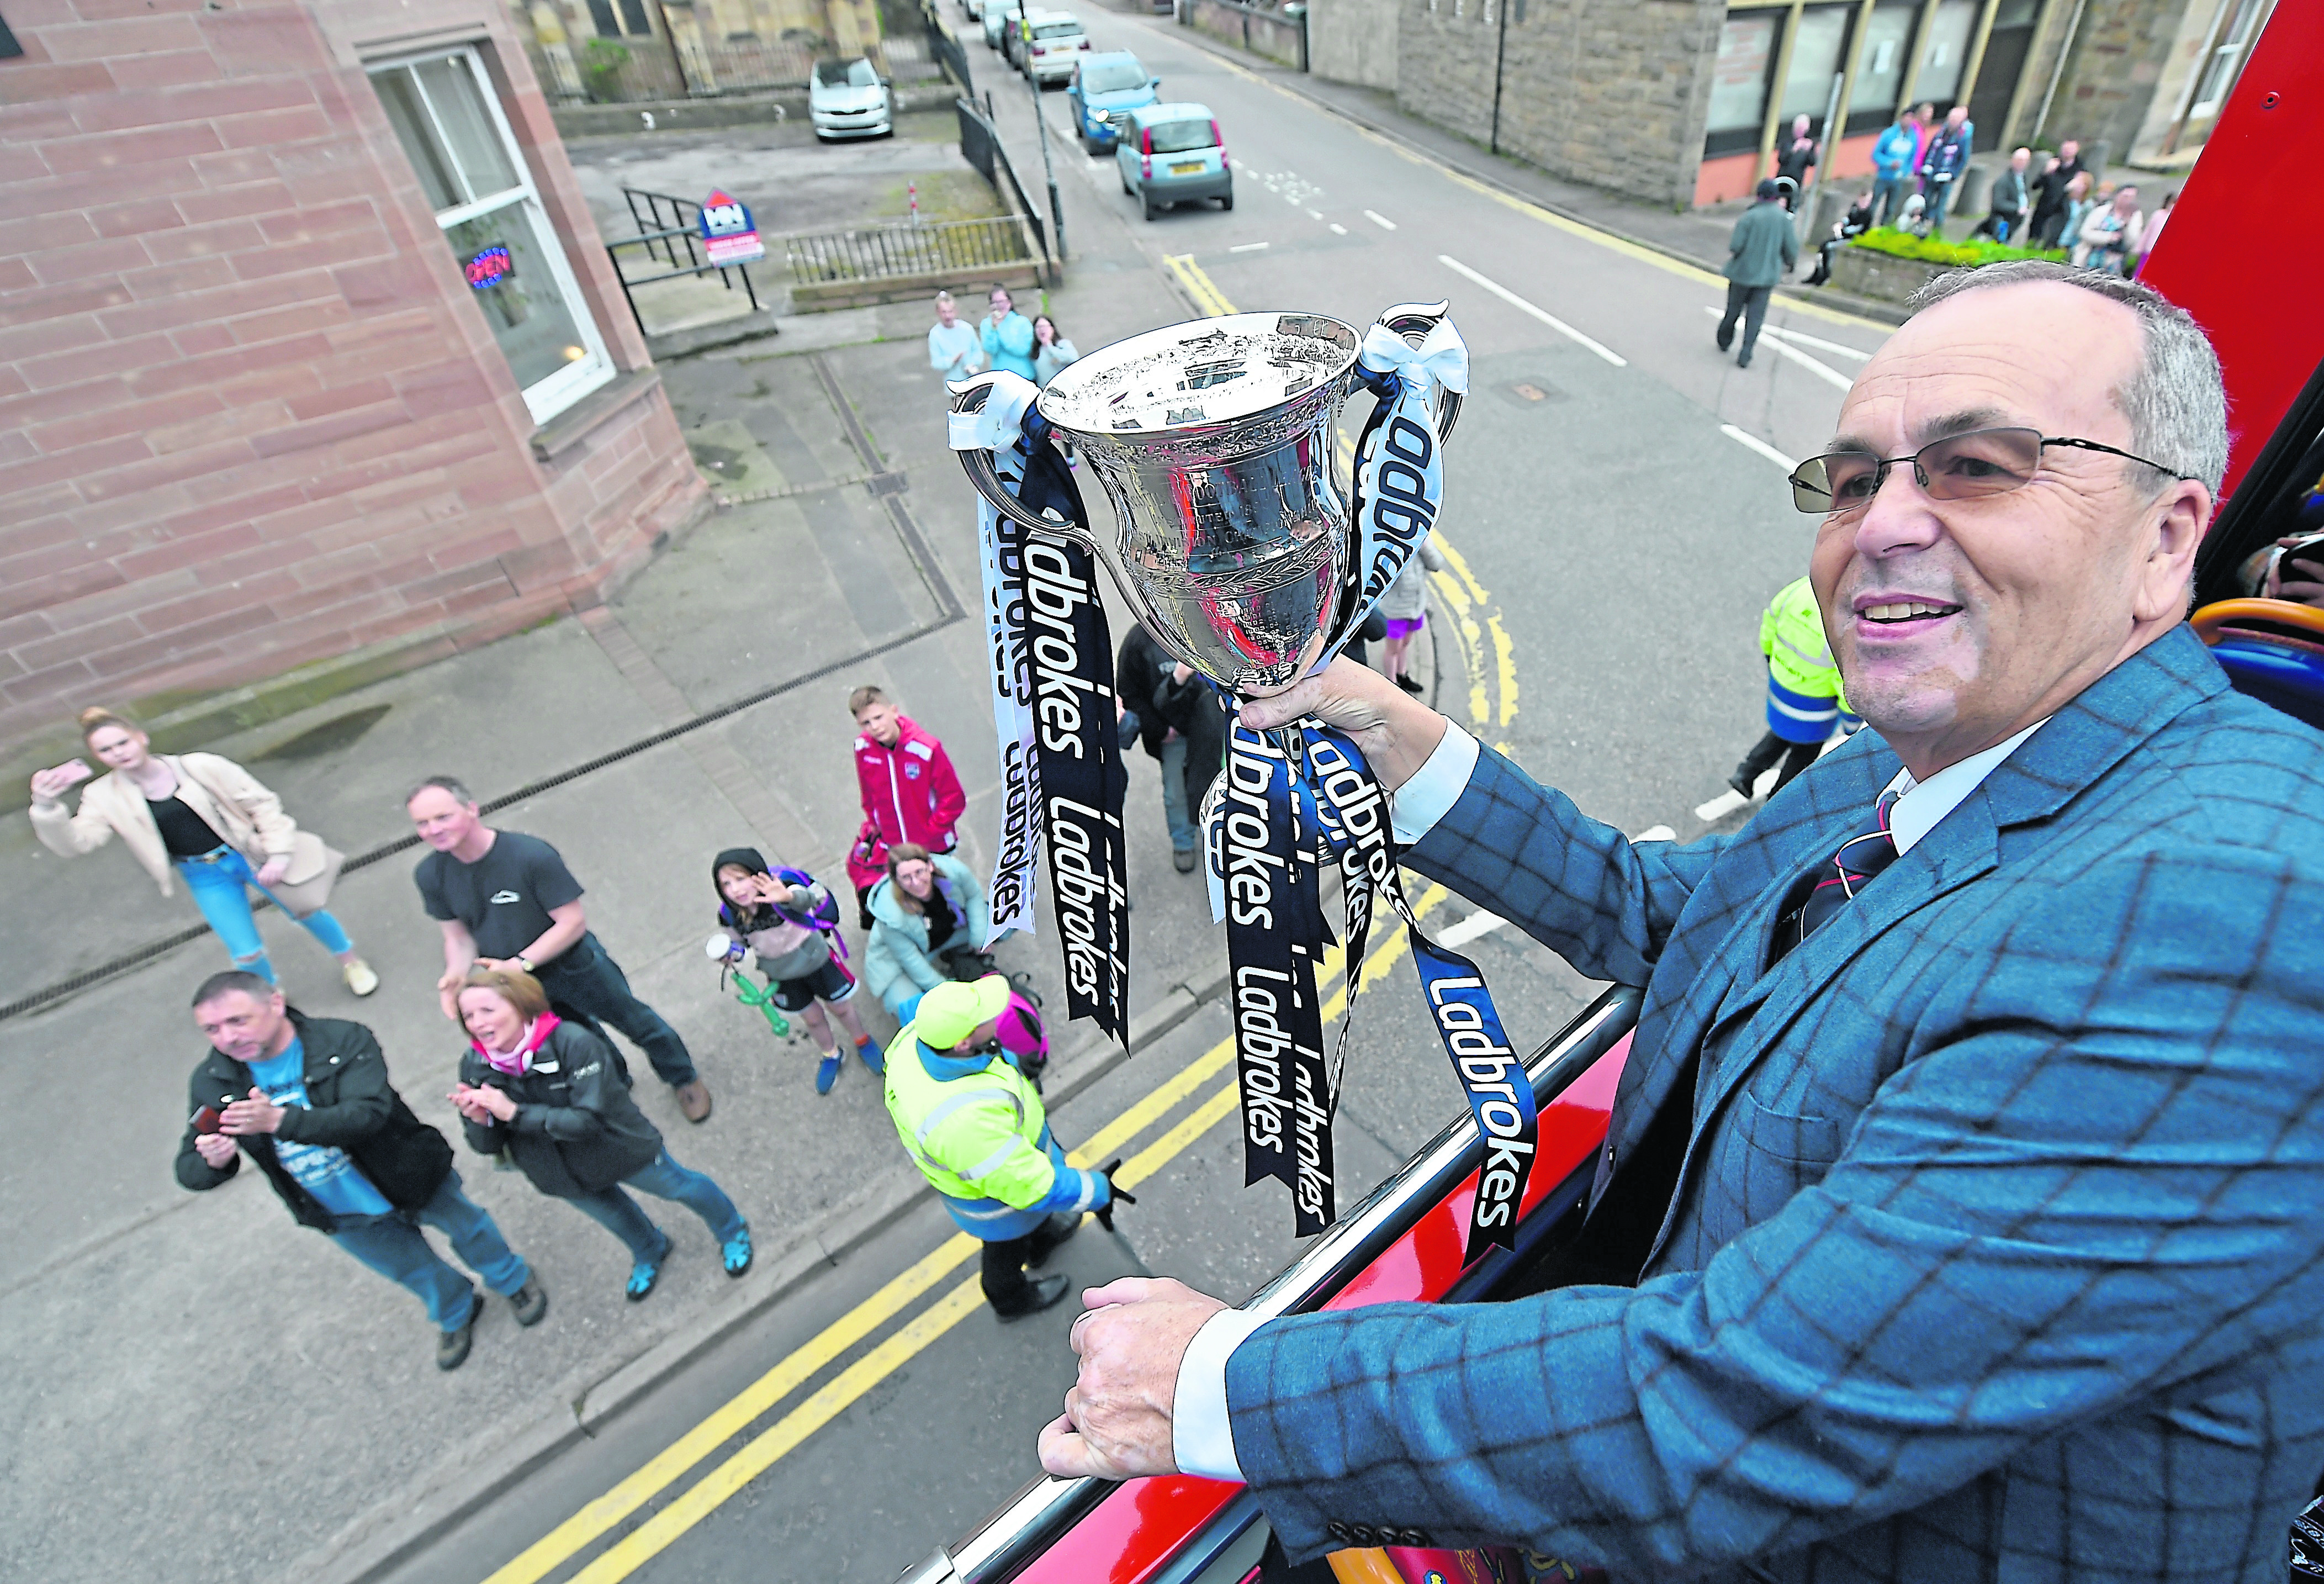 Chairman Roy MacGregor savours the moment with the trophy on the top deck of the bus.